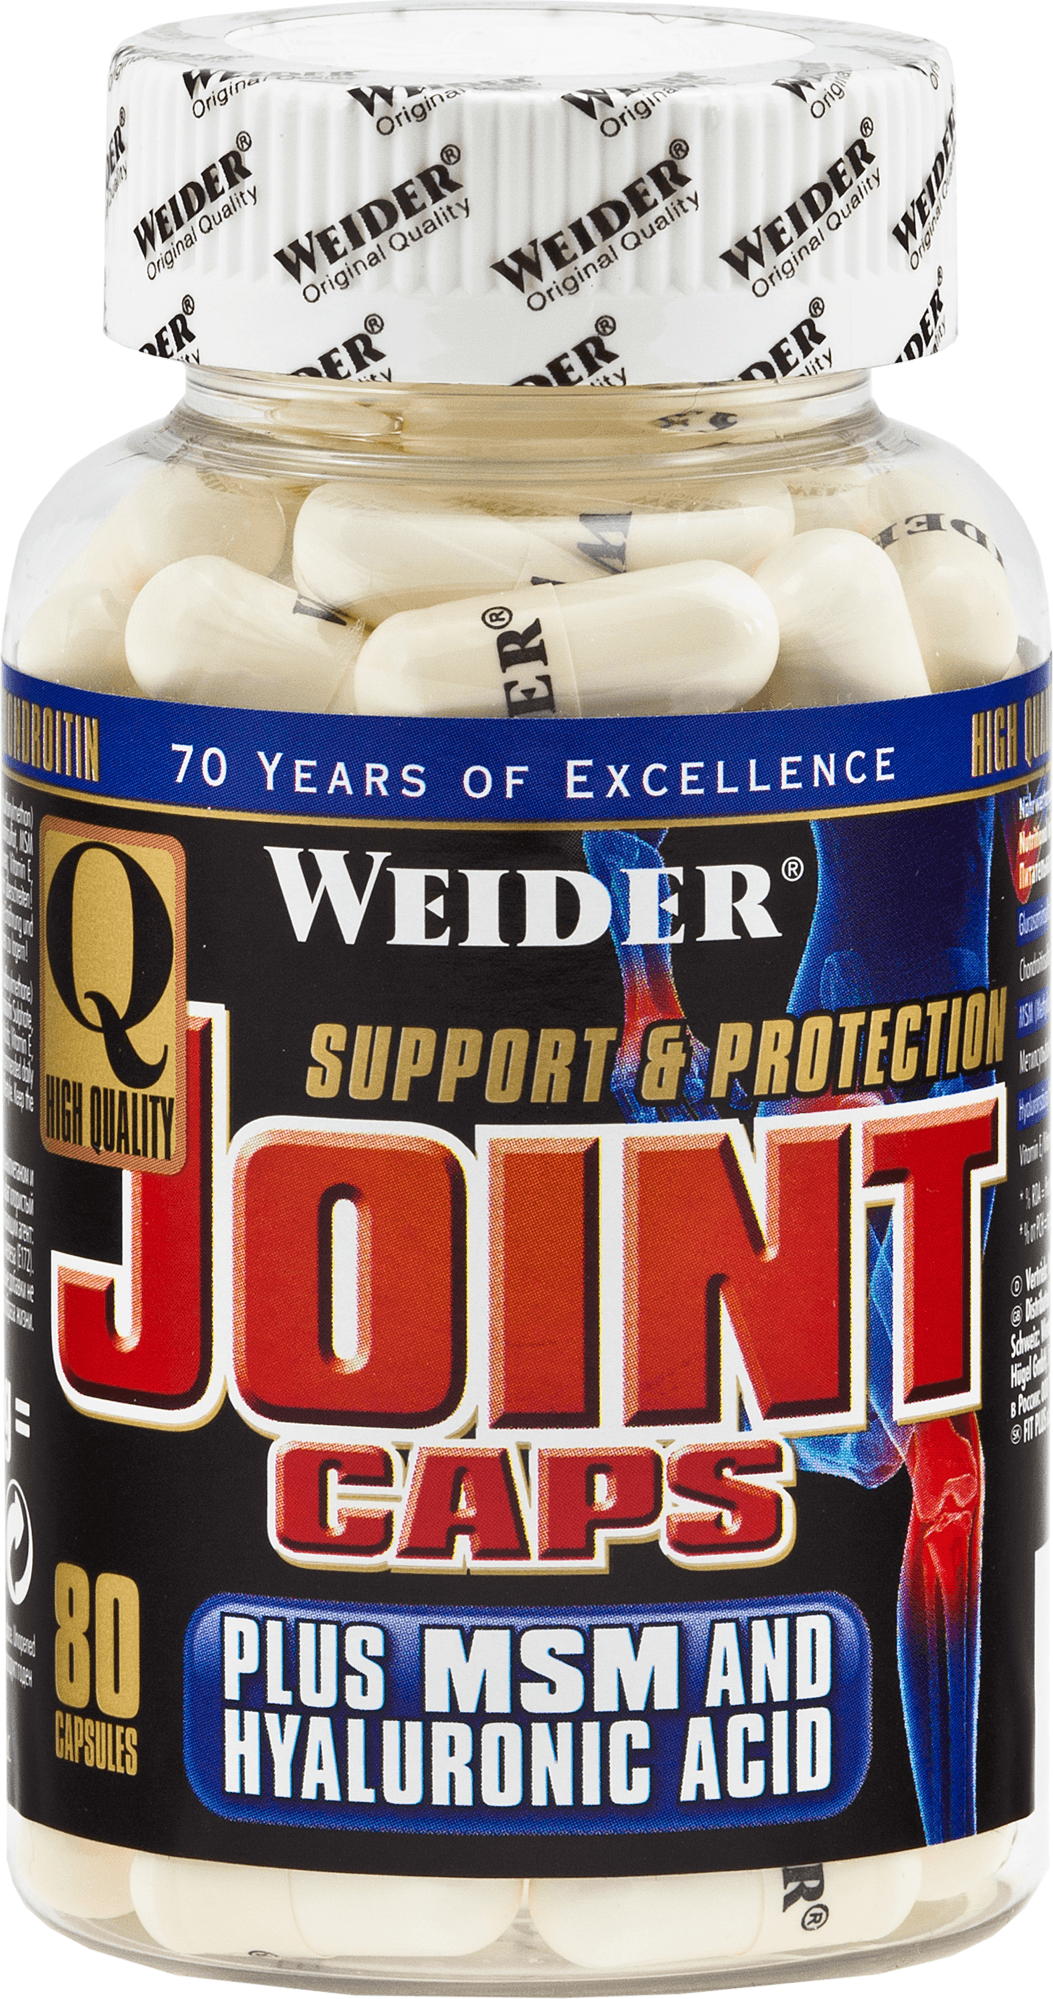 Joint Caps, 80 pcs, Weider. For joints and ligaments. General Health Ligament and Joint strengthening 